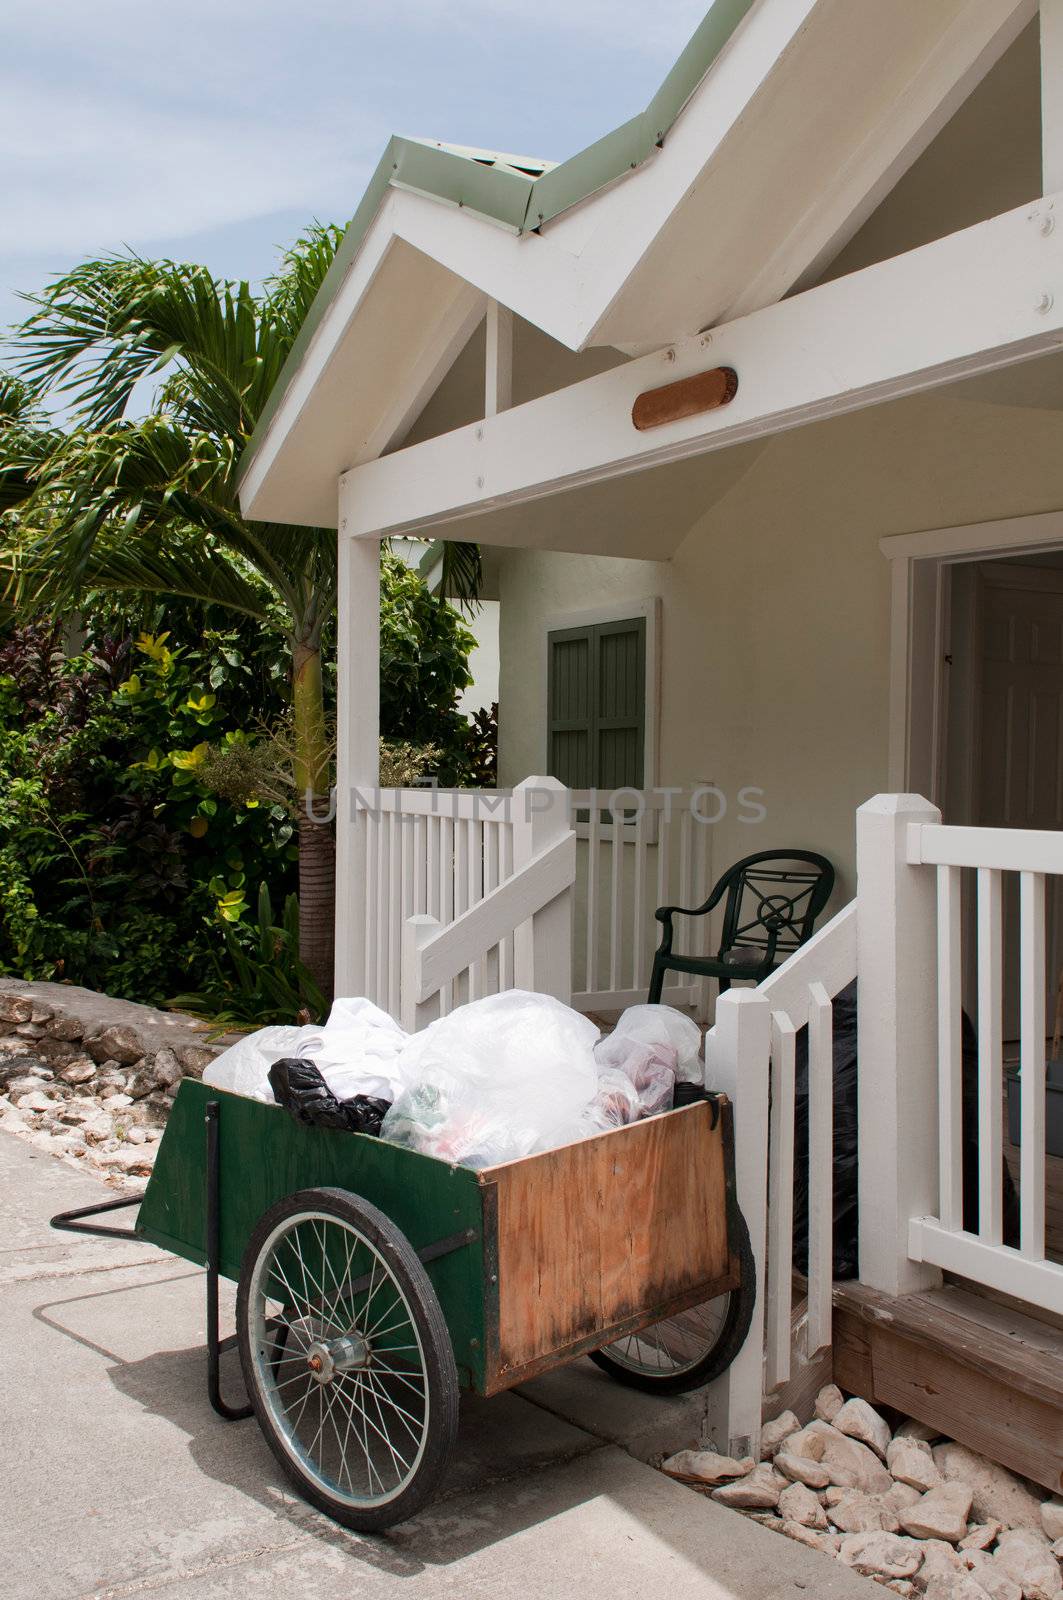 antique cleaning cart outside tropical resort villa (in the carribean)